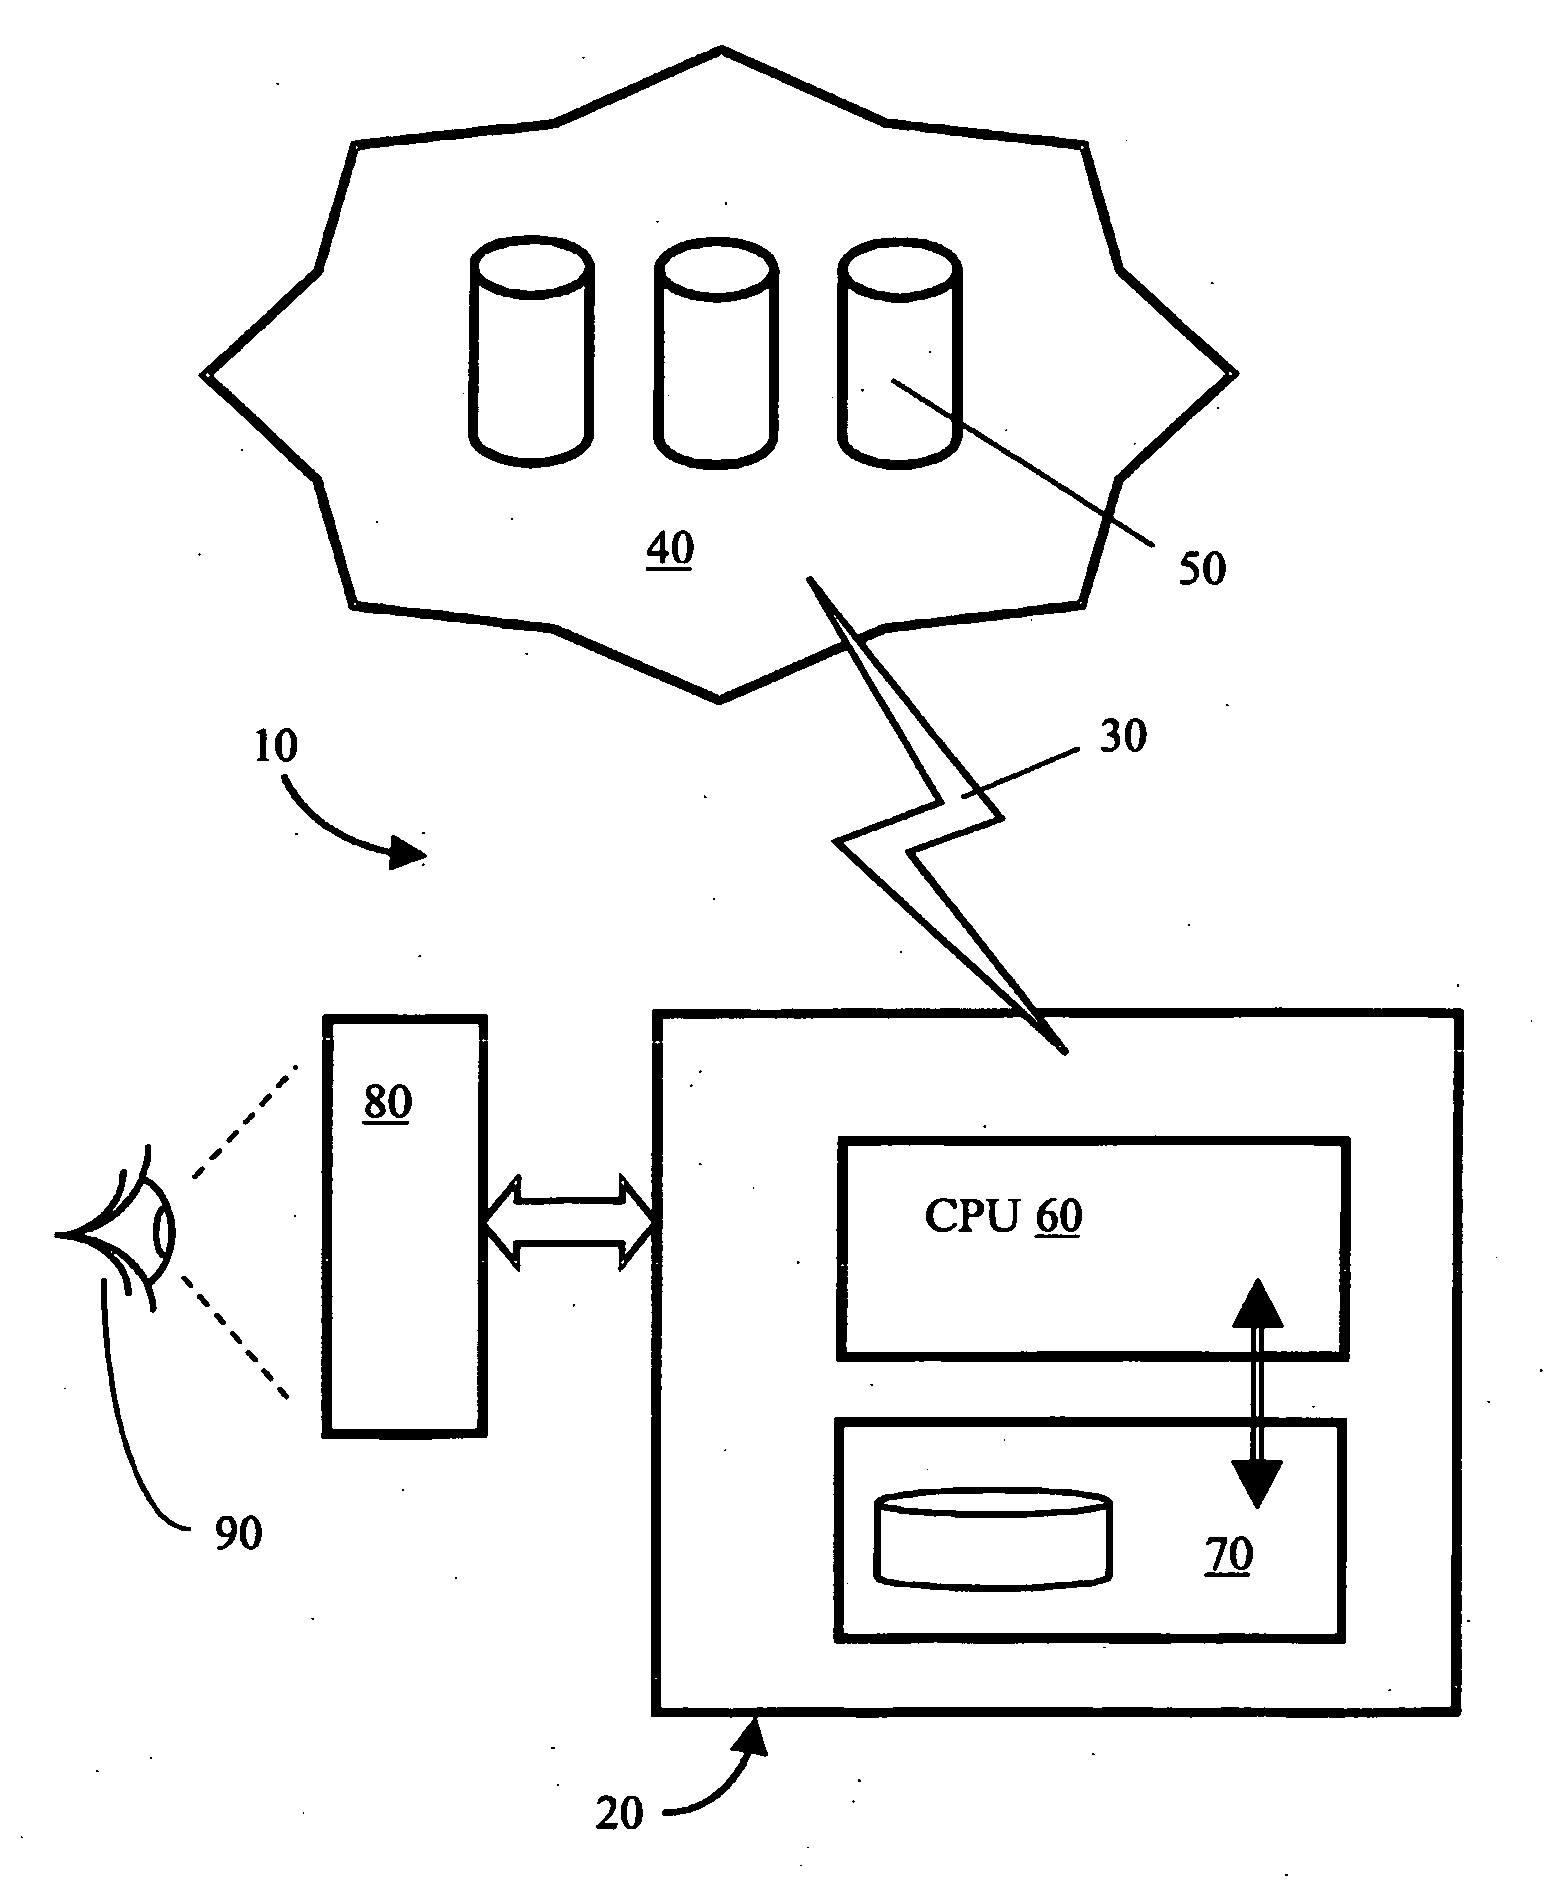 Method of Controlling Access to a Communication Network